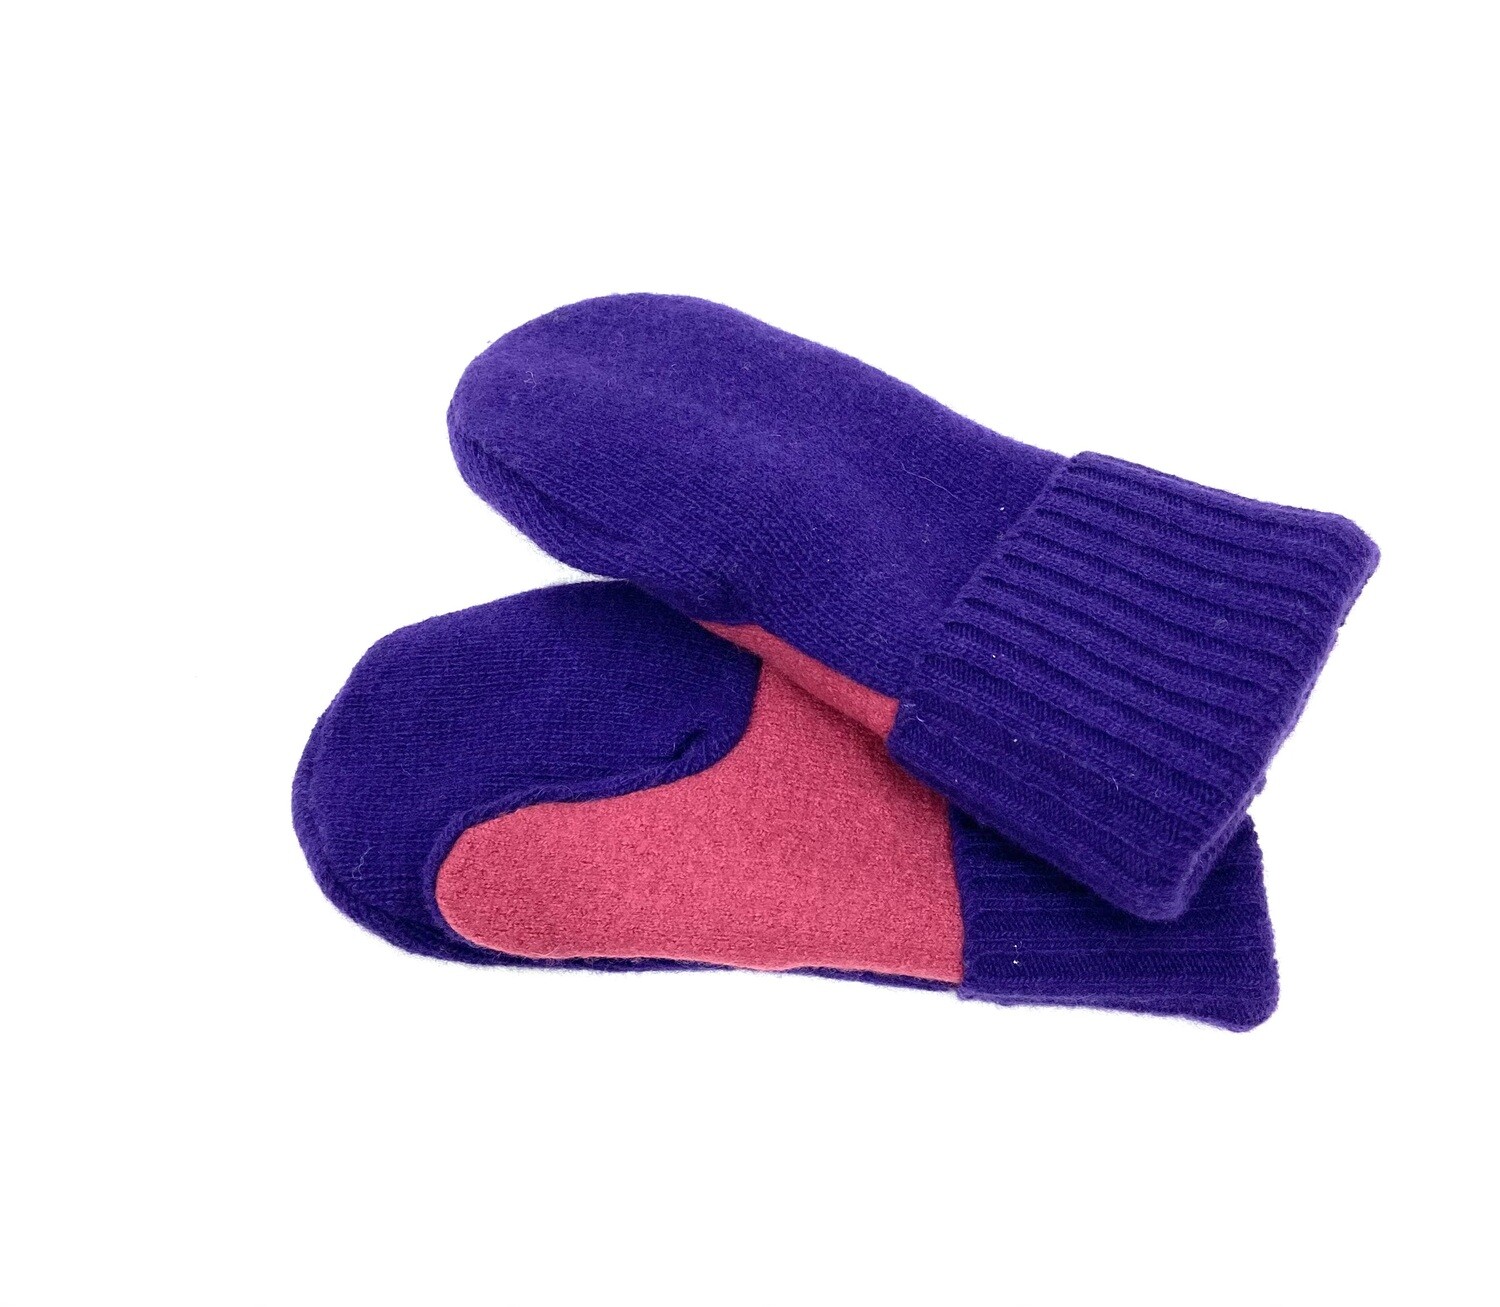 Small Purple and Pink- Mary's Mittens